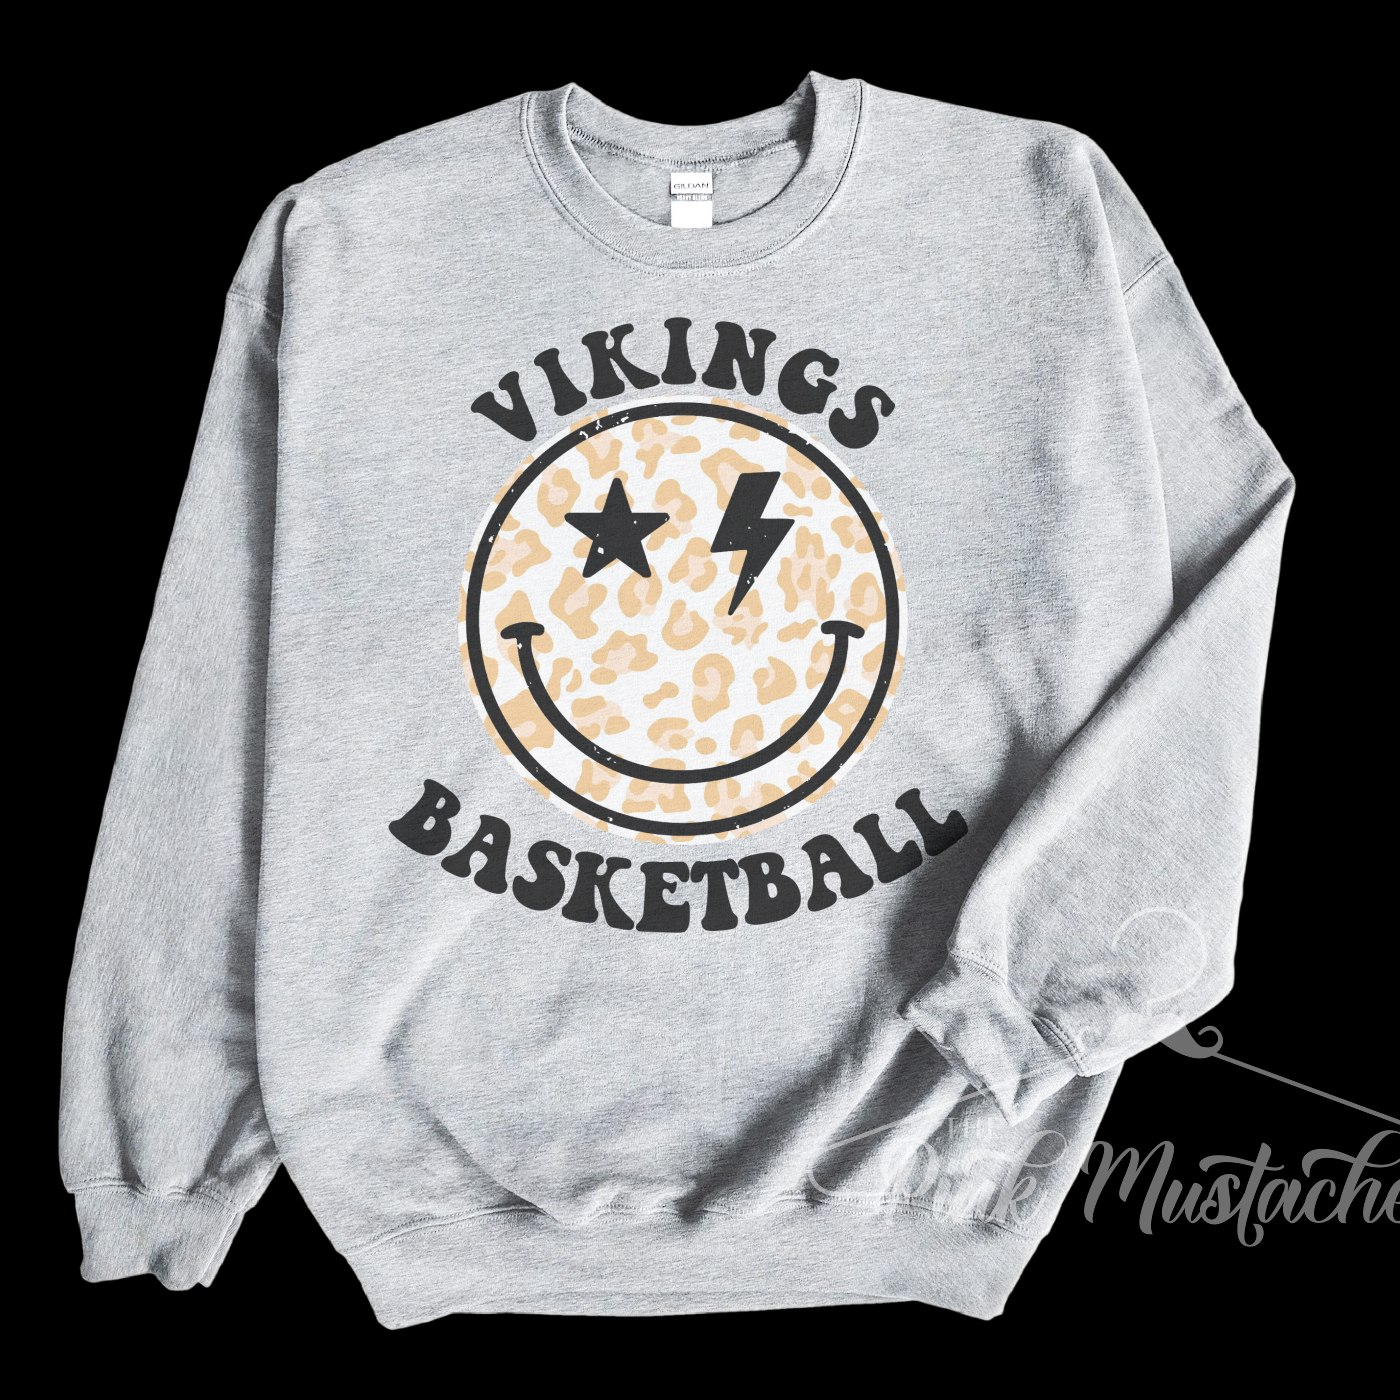 Vikings Basketball Distressed Smiley Unisex Sweatshirt / Toddler, Youth, and Adult Sizes